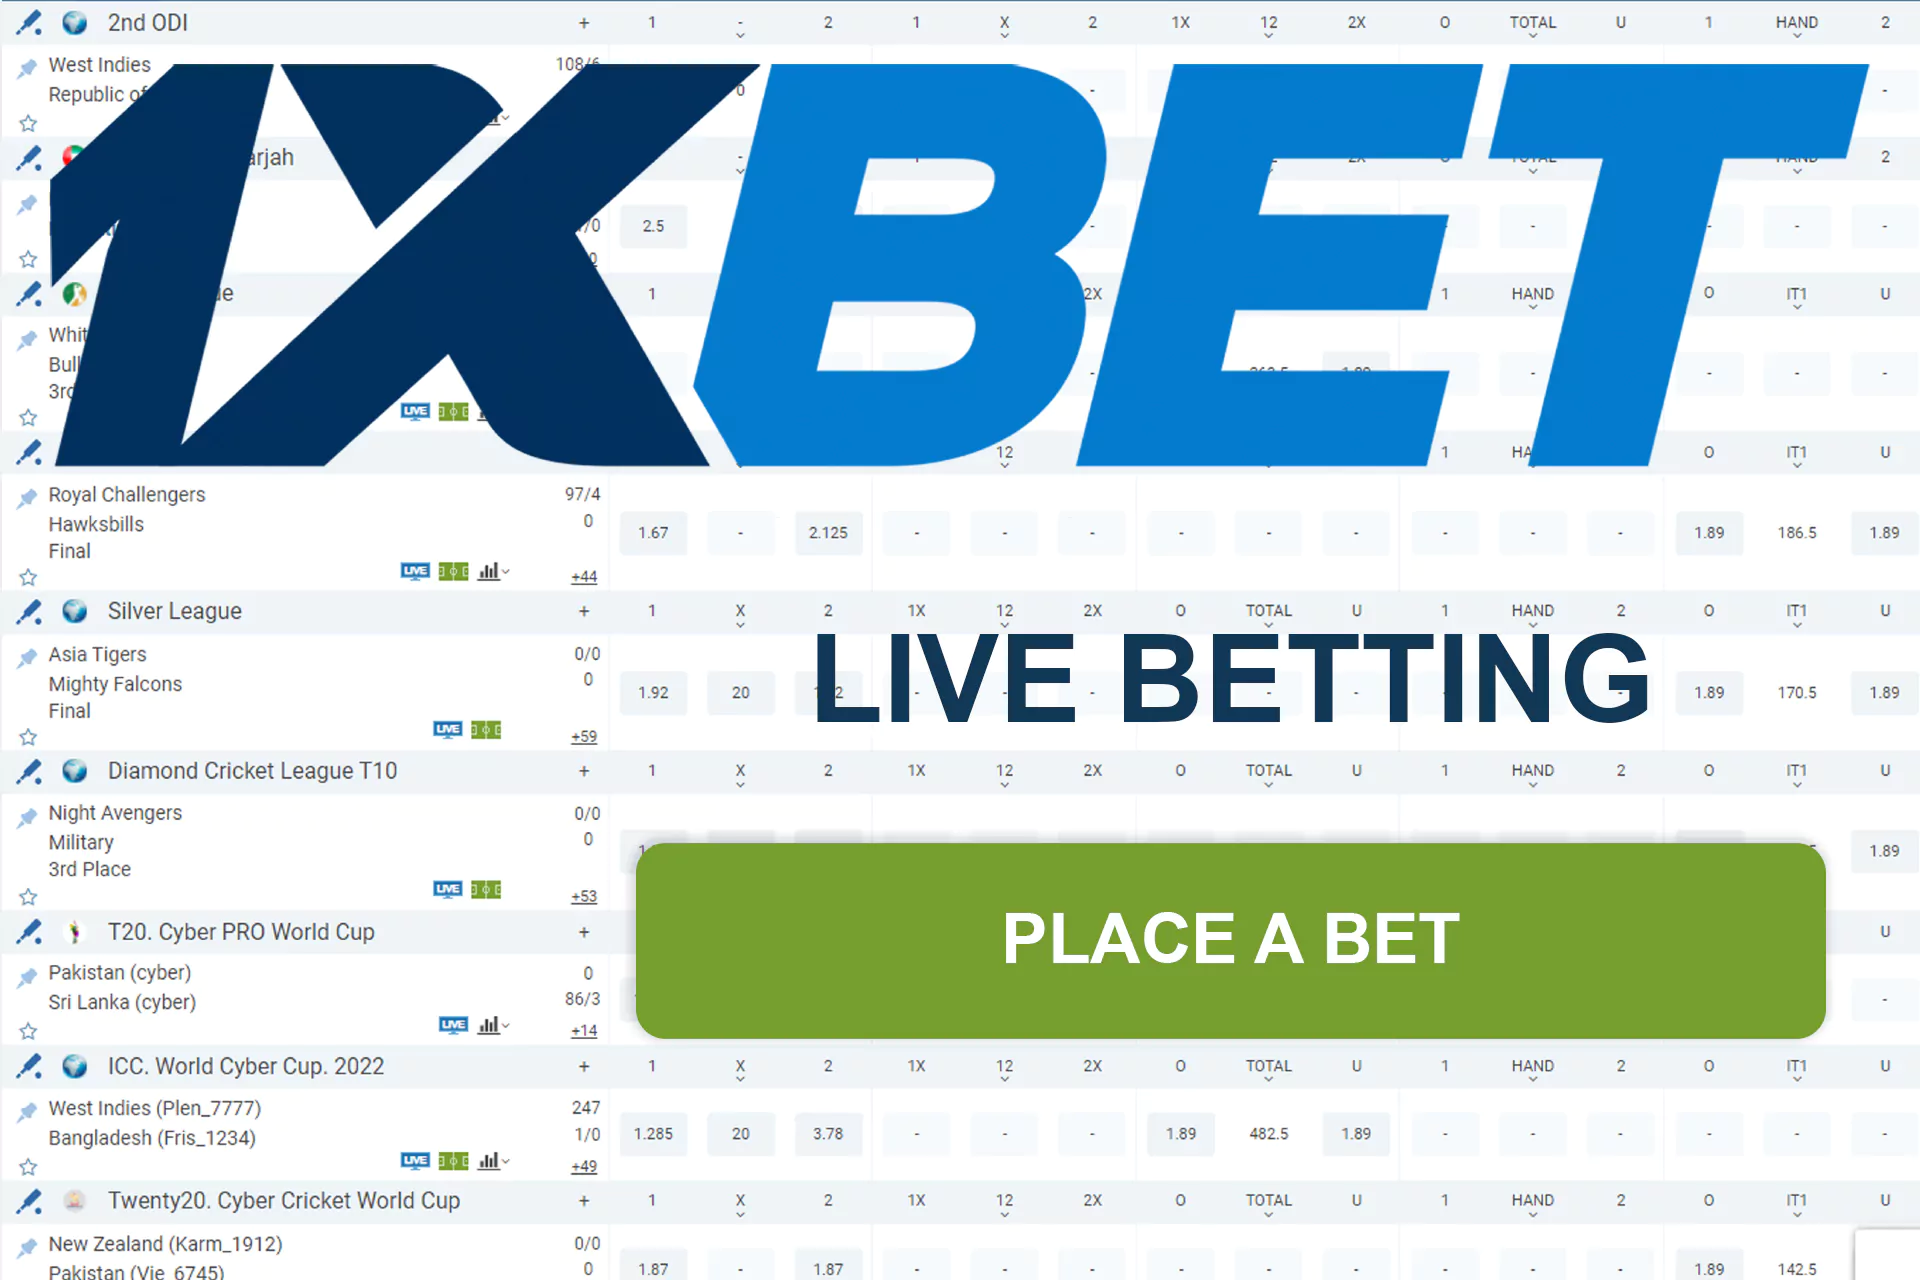 Live betting is an exciting possibility to place bets during the match.